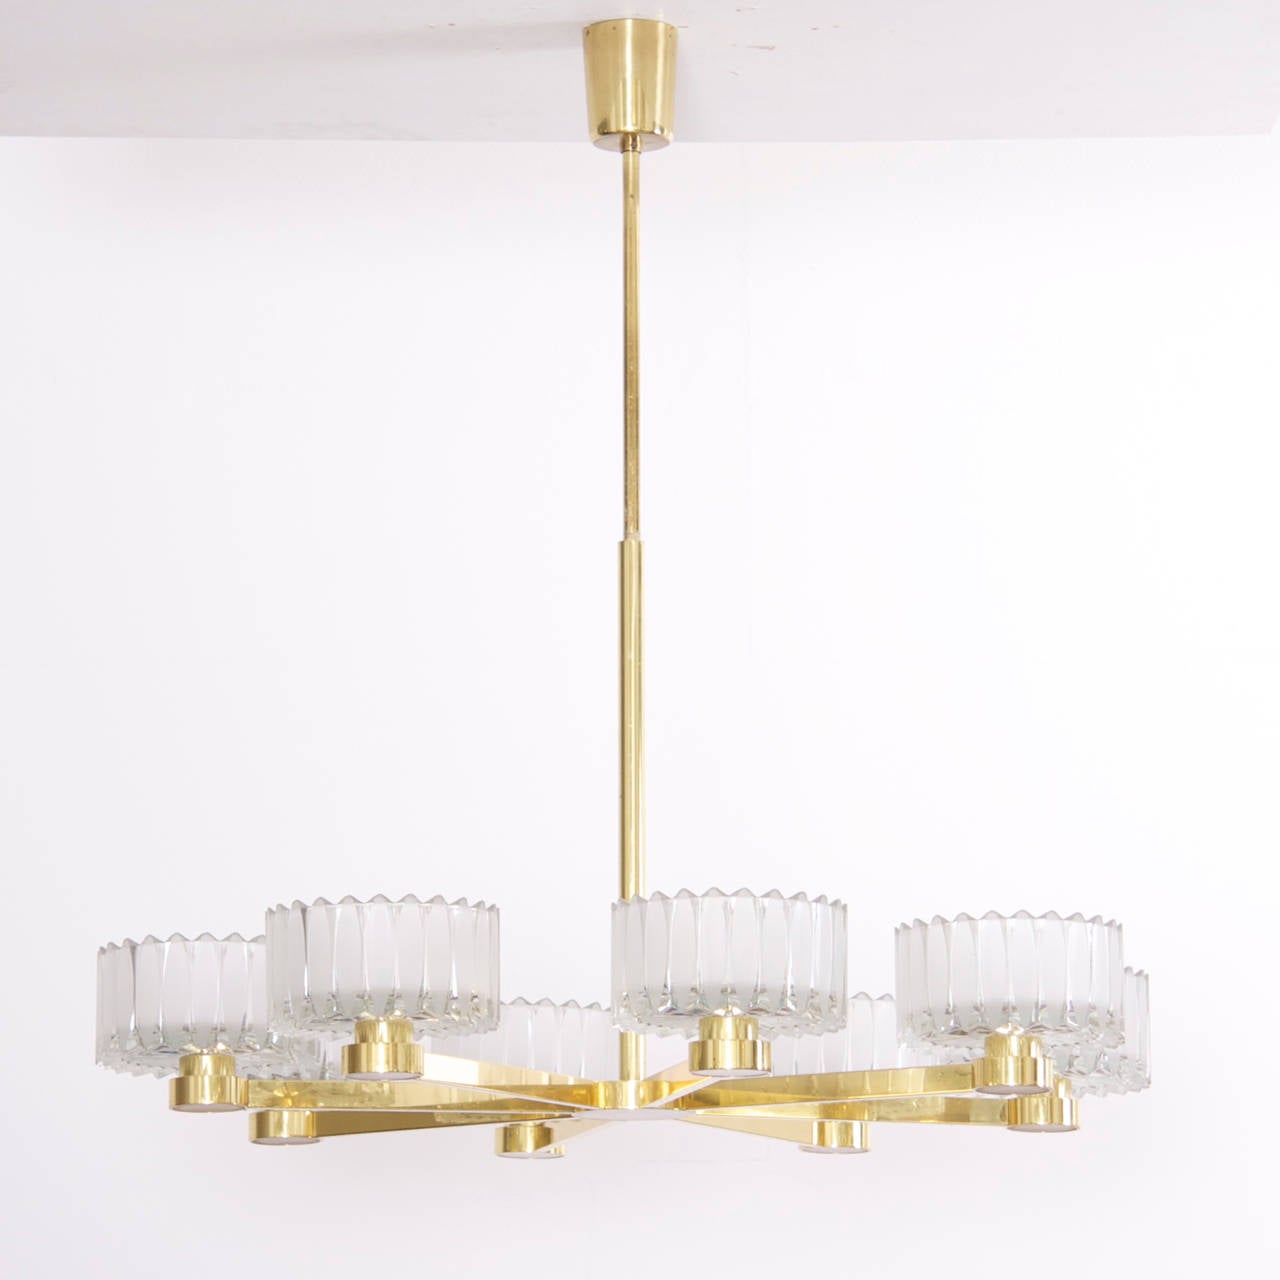 Brass and glass chandelier in excellent condition. Eight x E14 fittings.
To be on the the safe side, the lamp should be checked locally by a specialist concerning local requirements.
